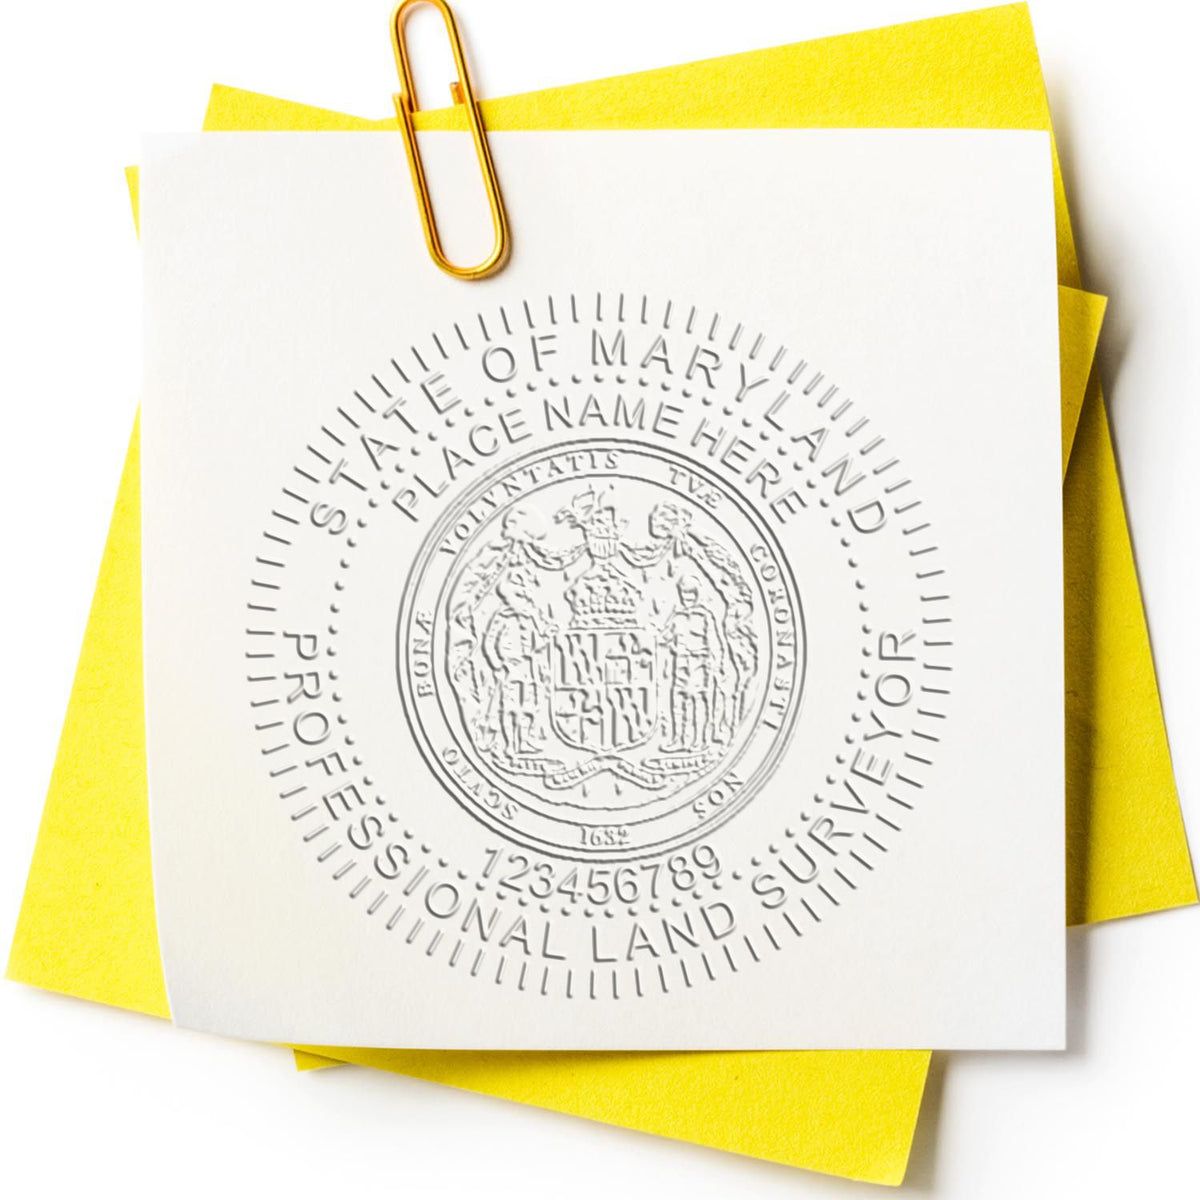 A stamped impression of the Long Reach Maryland Land Surveyor Seal in this stylish lifestyle photo, setting the tone for a unique and personalized product.